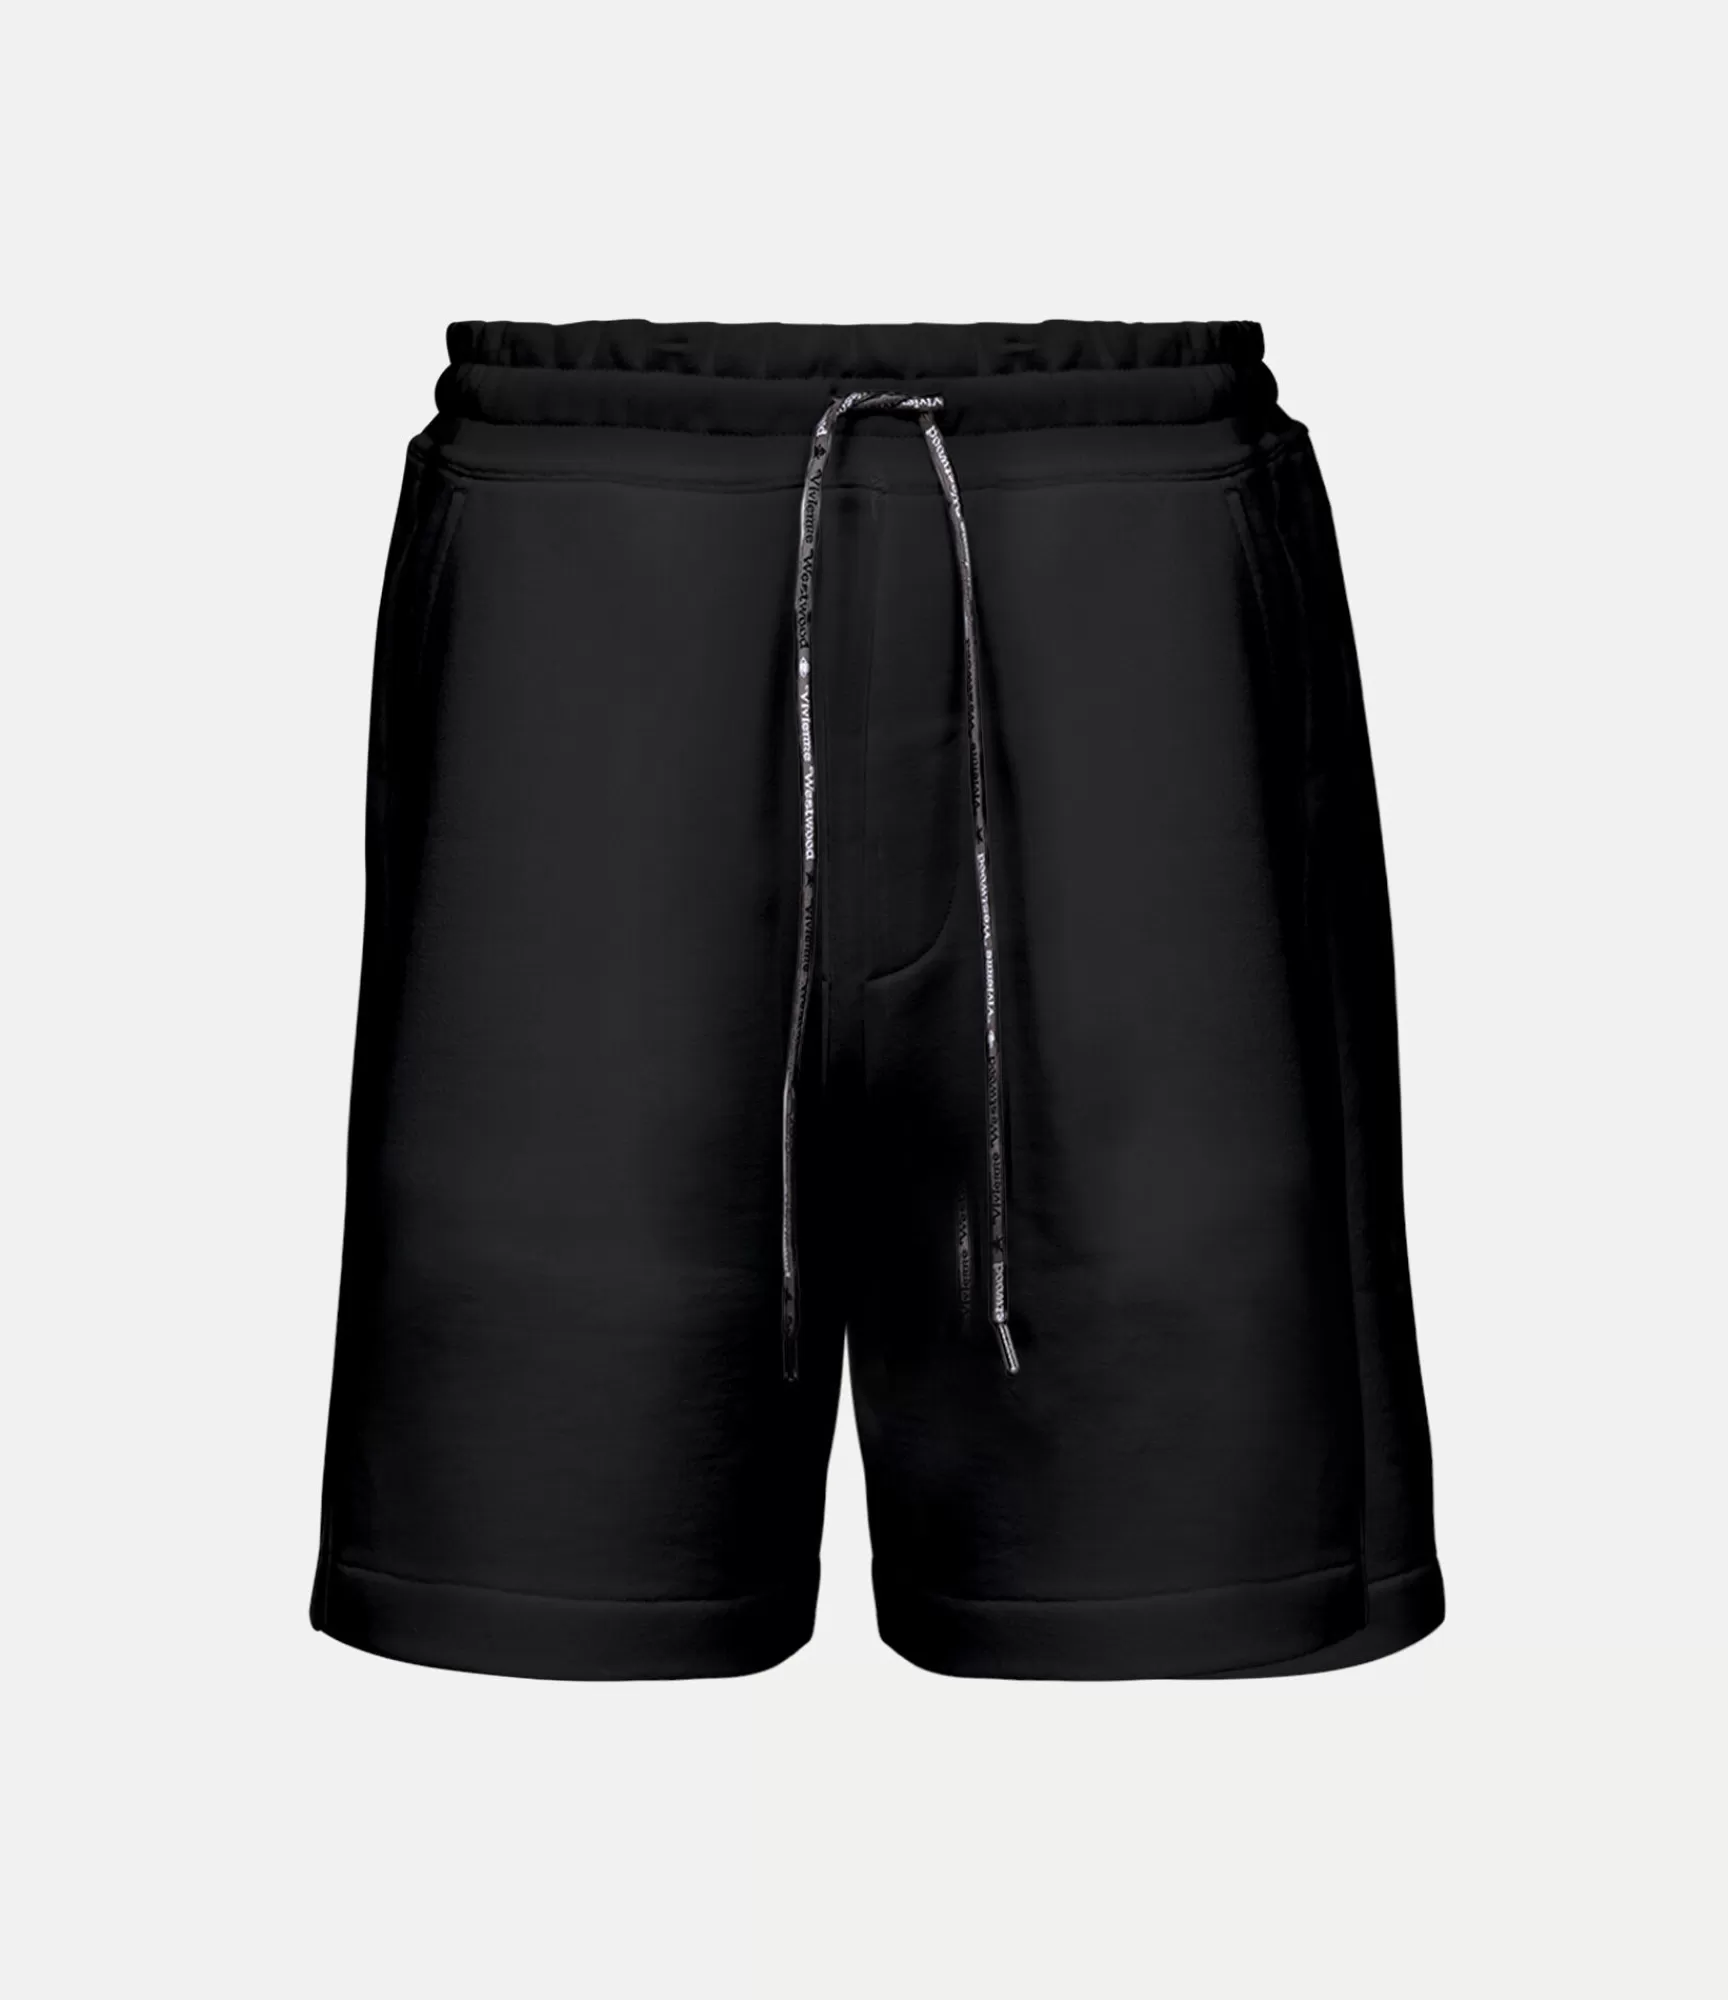 Vivienne Westwood Trousers and Shorts*Spray orb action man shorts Black